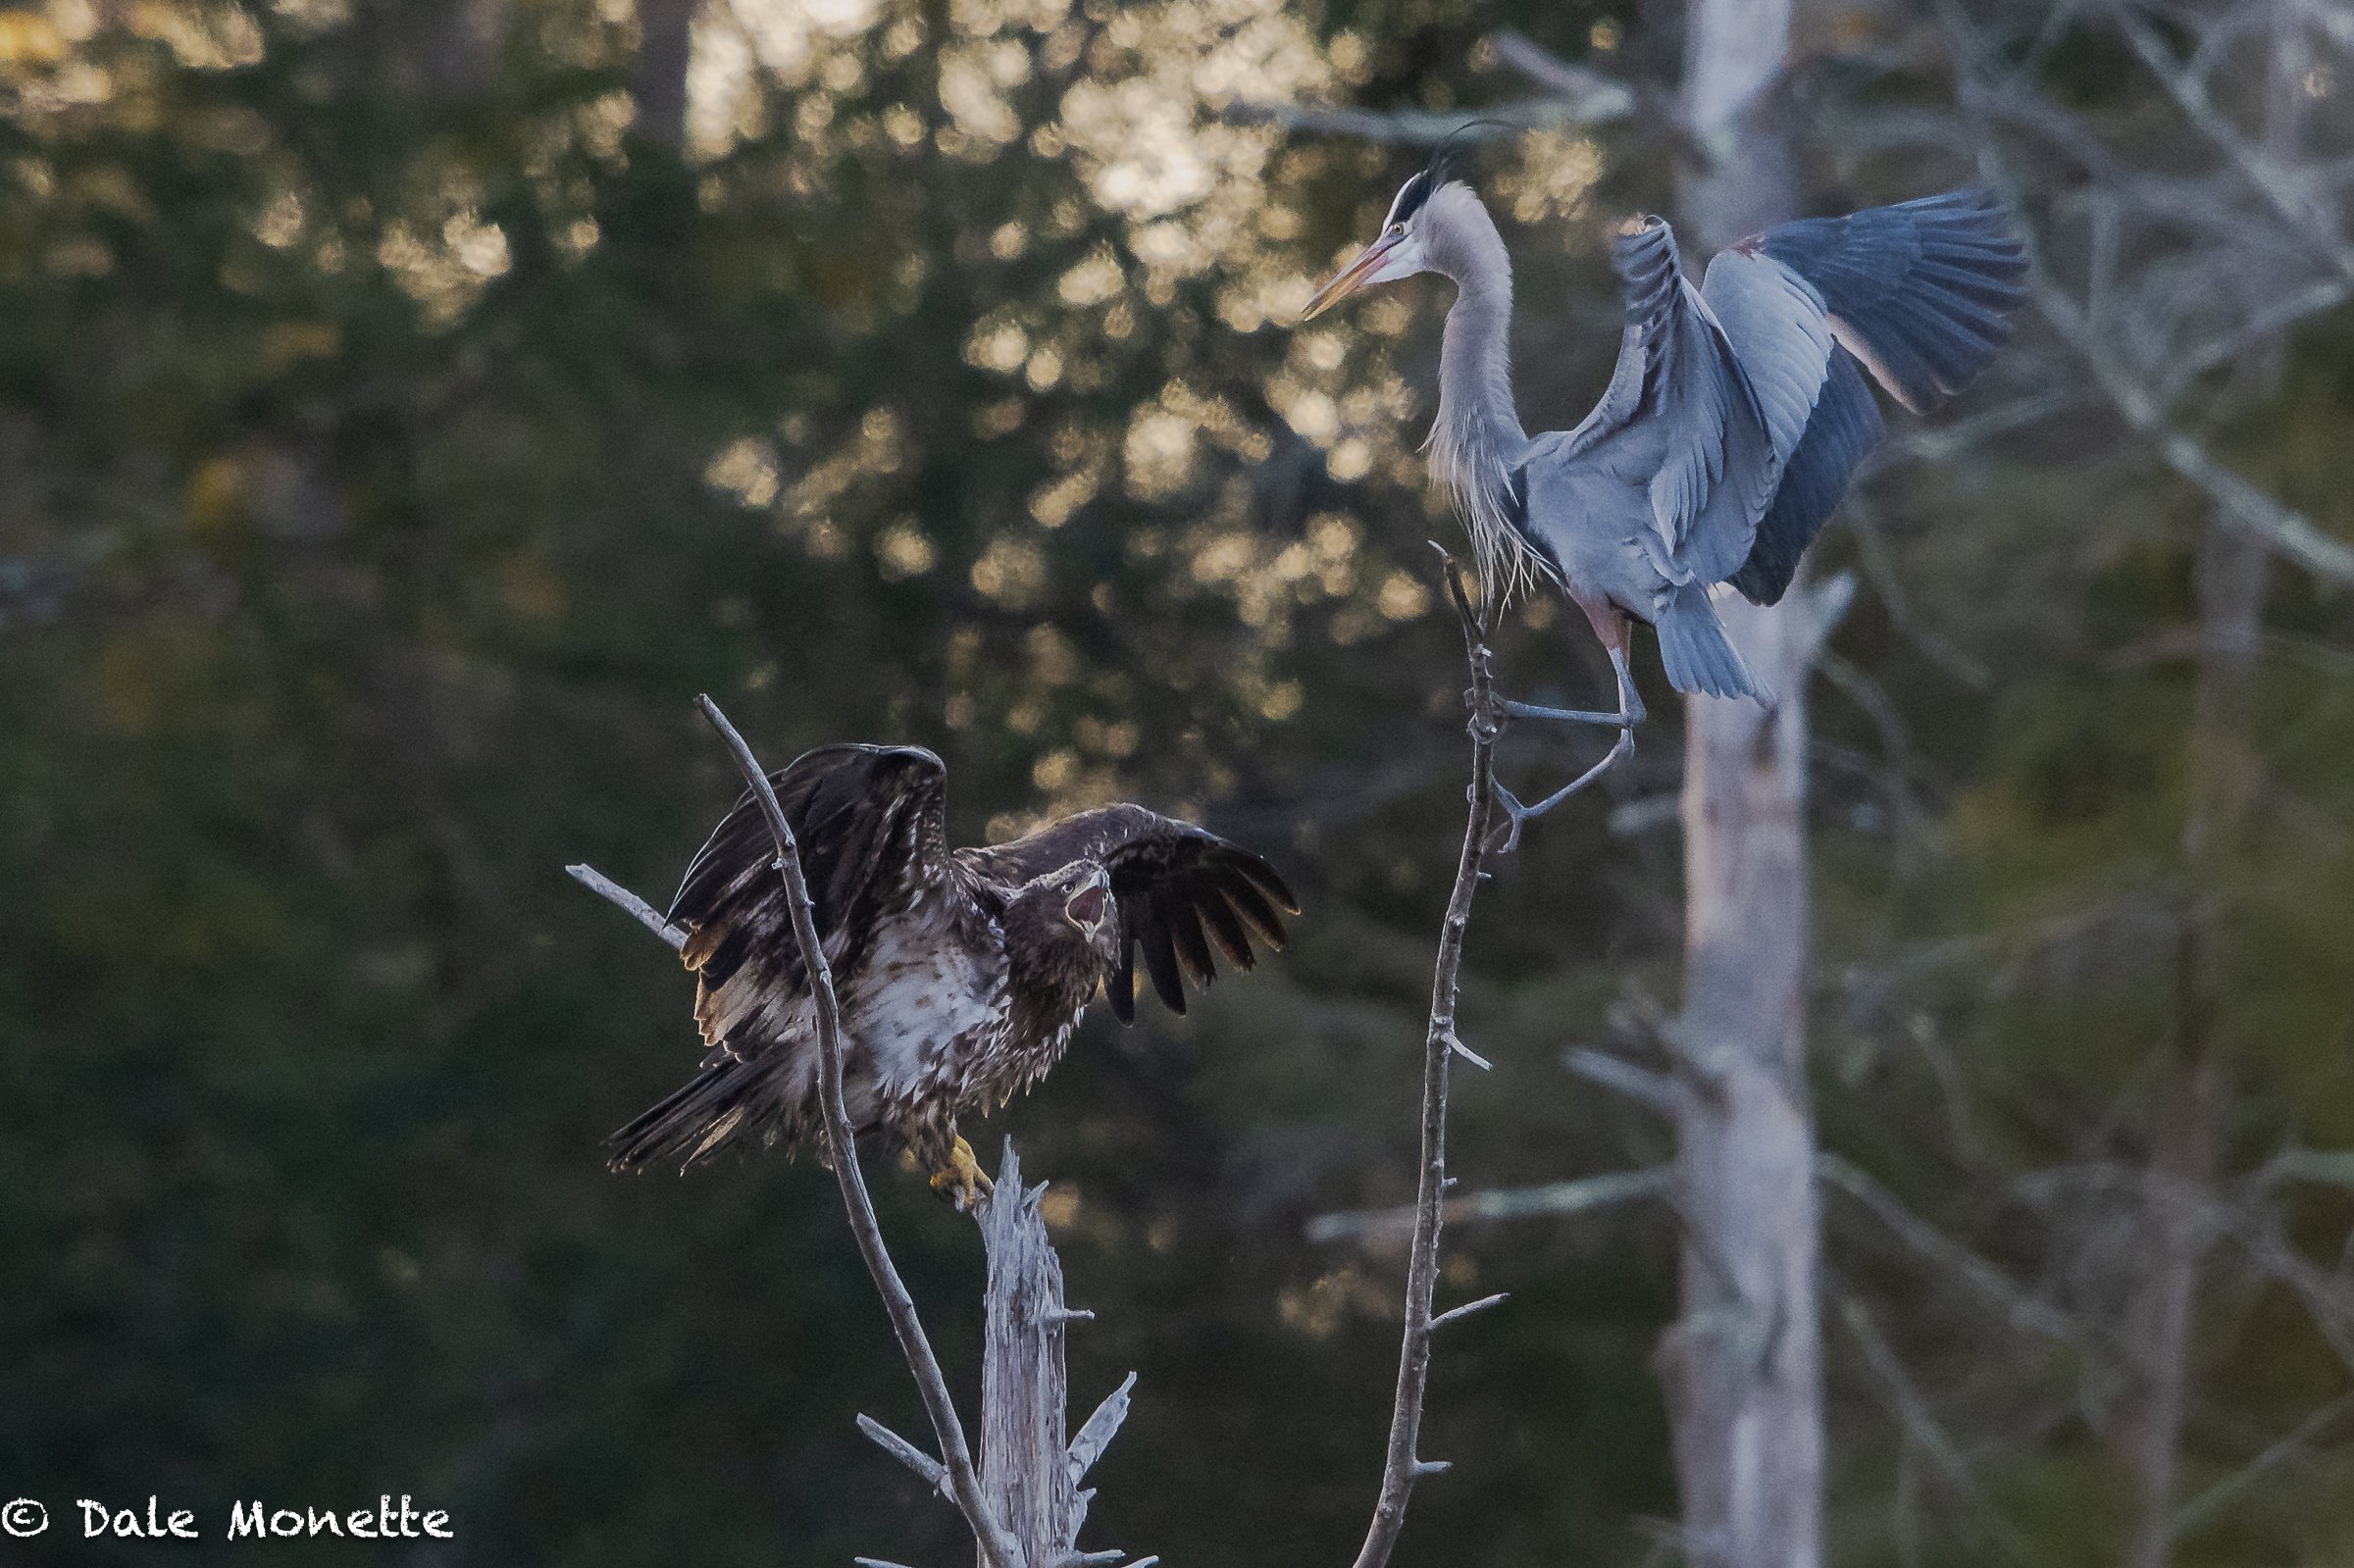   An immature bald eagle drives female great blue heron off of her nest in the early nesting season.  